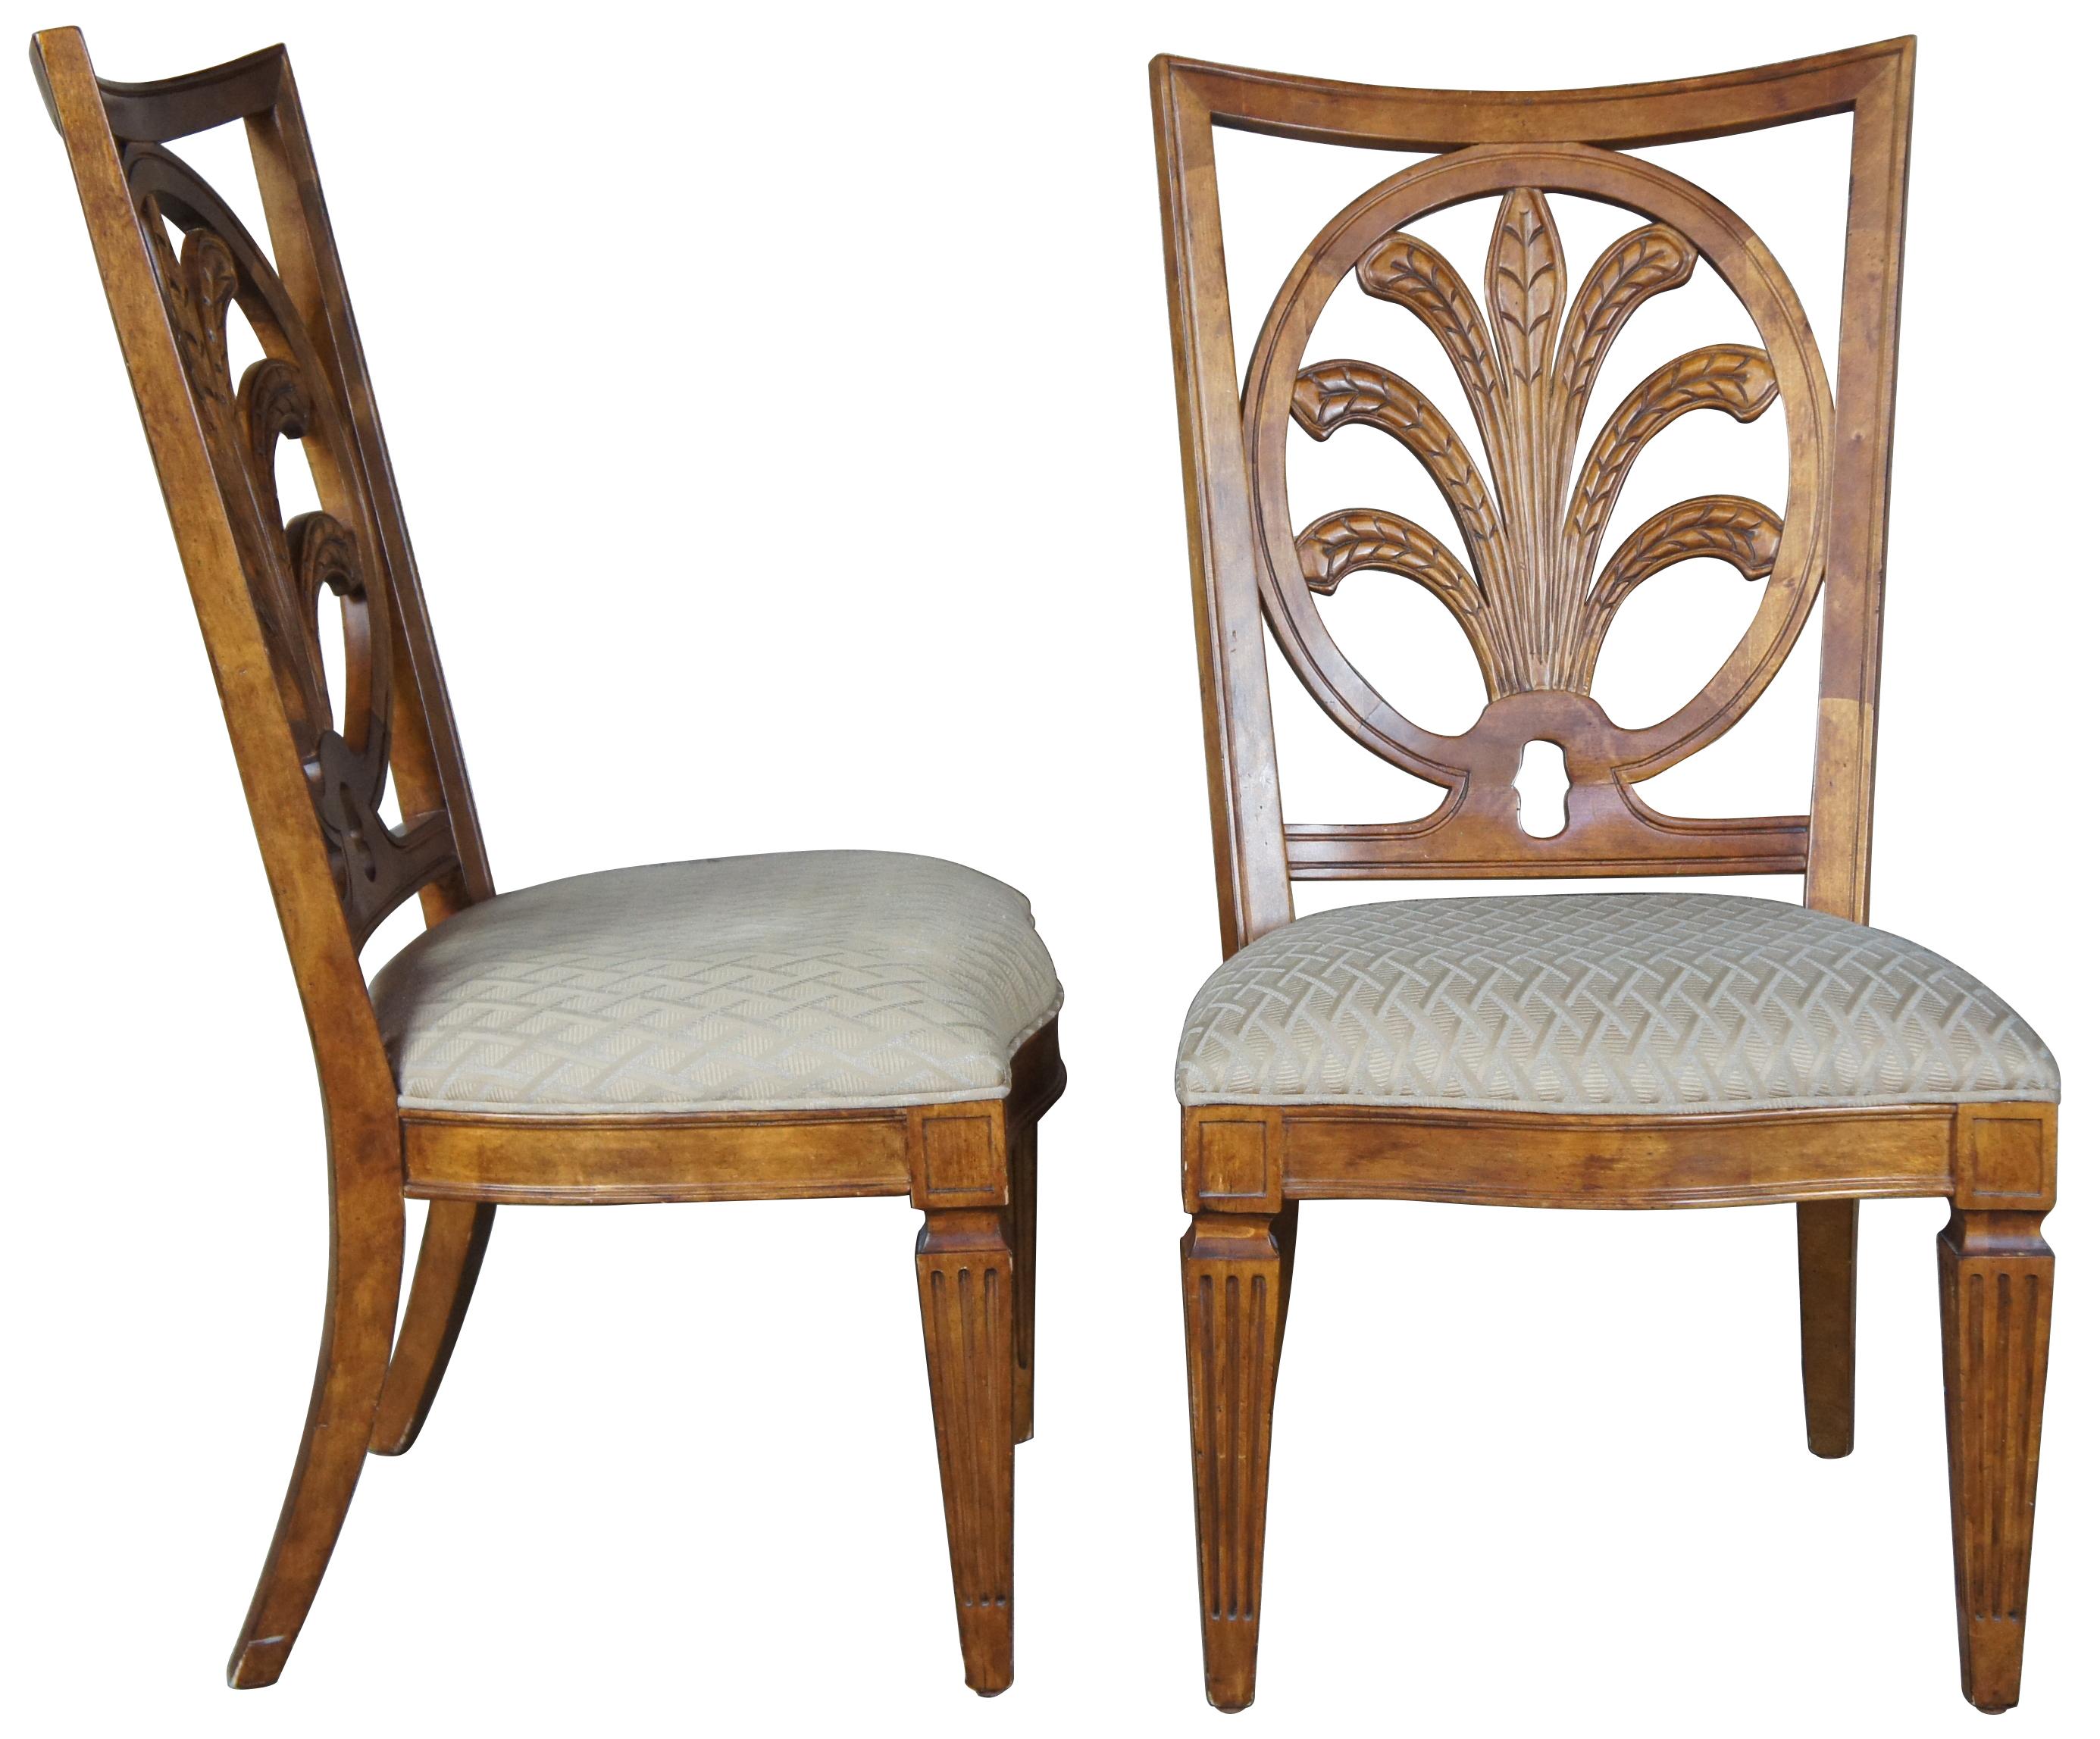 8 Century Furniture Mitsford dining chairs finished in Edinburgh (maple) finish, item #3821 / 52-531. Feature pierced back with round circular sprawling leaf design that resembles a sheath of wheat or acanthus style. An upholstered seat leads to